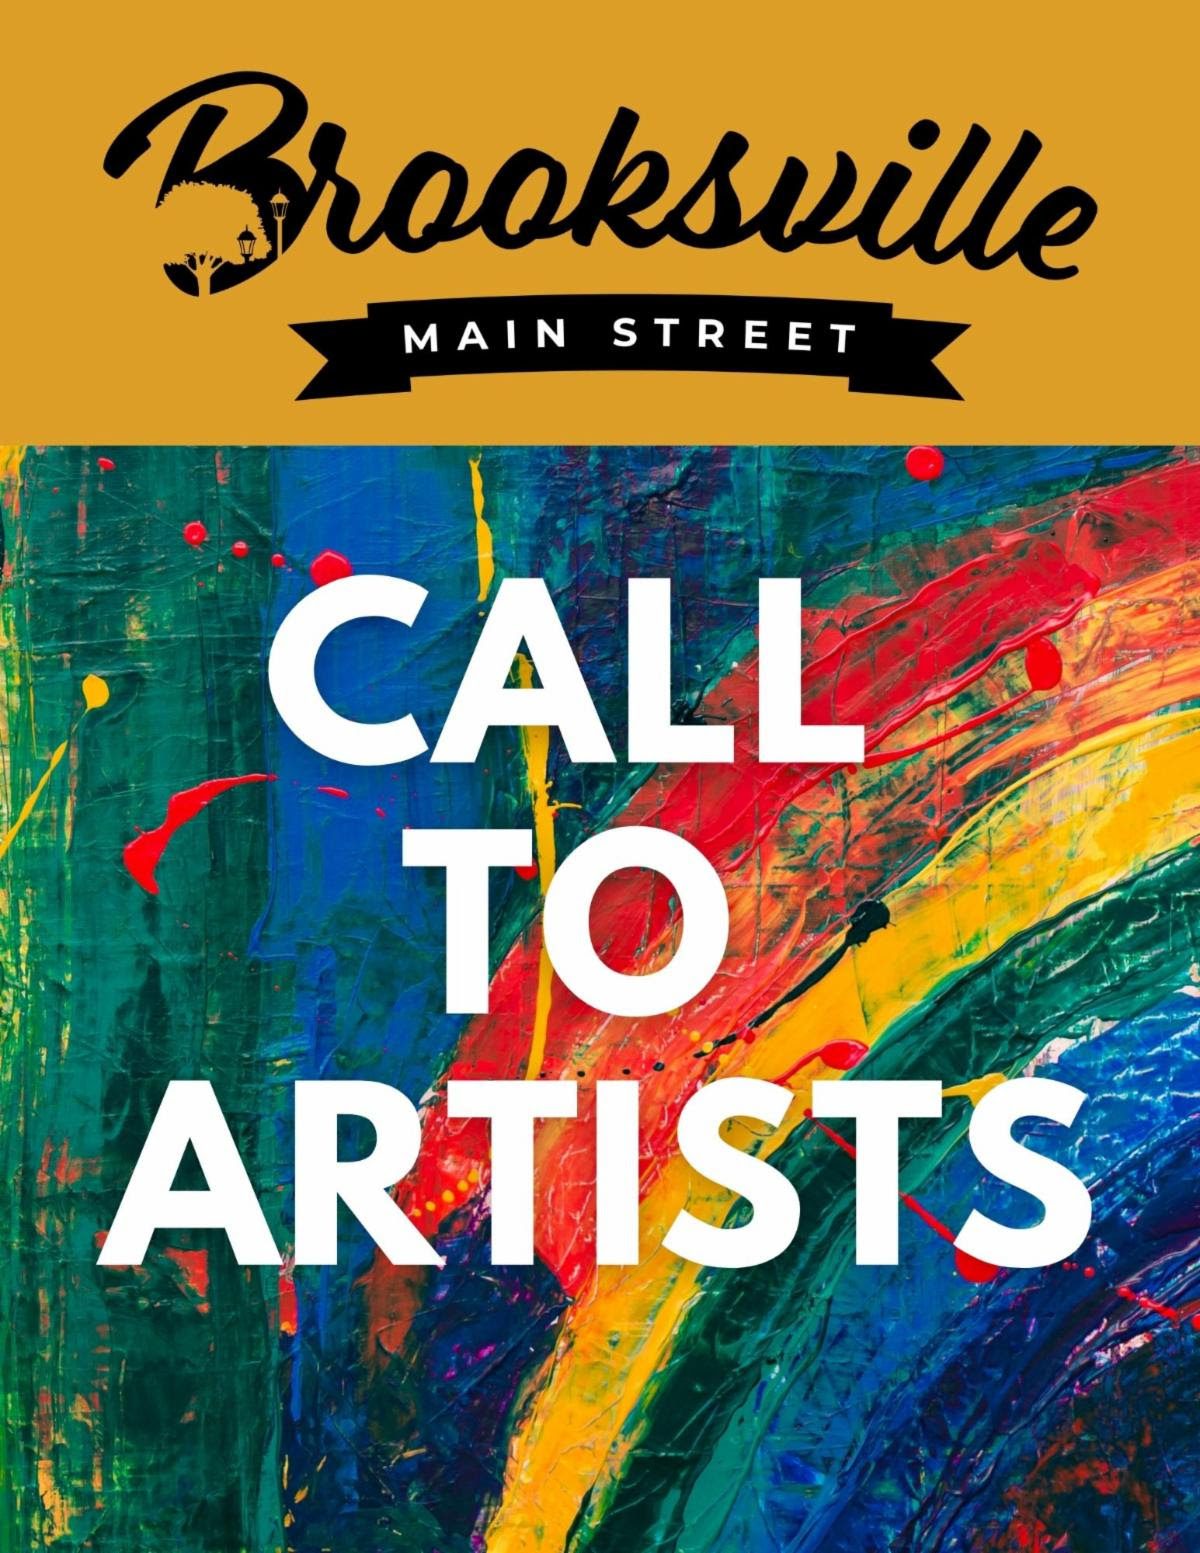 There are a few projects in need of artists with murals. You can find the information for these Brooksville murals below.